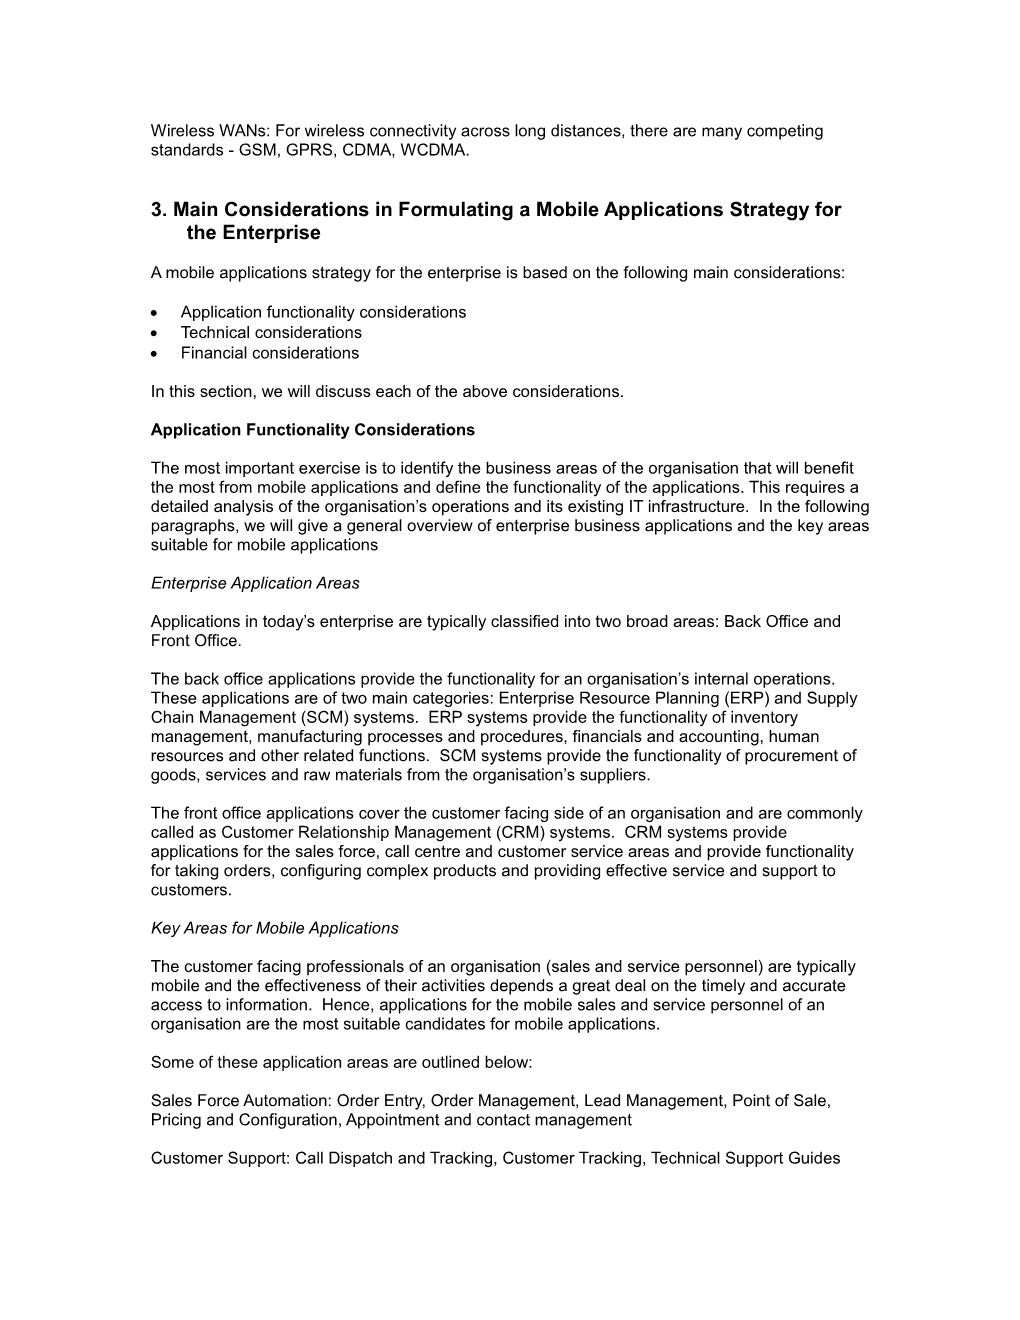 Considerations for a Wireless Applications Strategy for an Enterprise an Executive White Paper